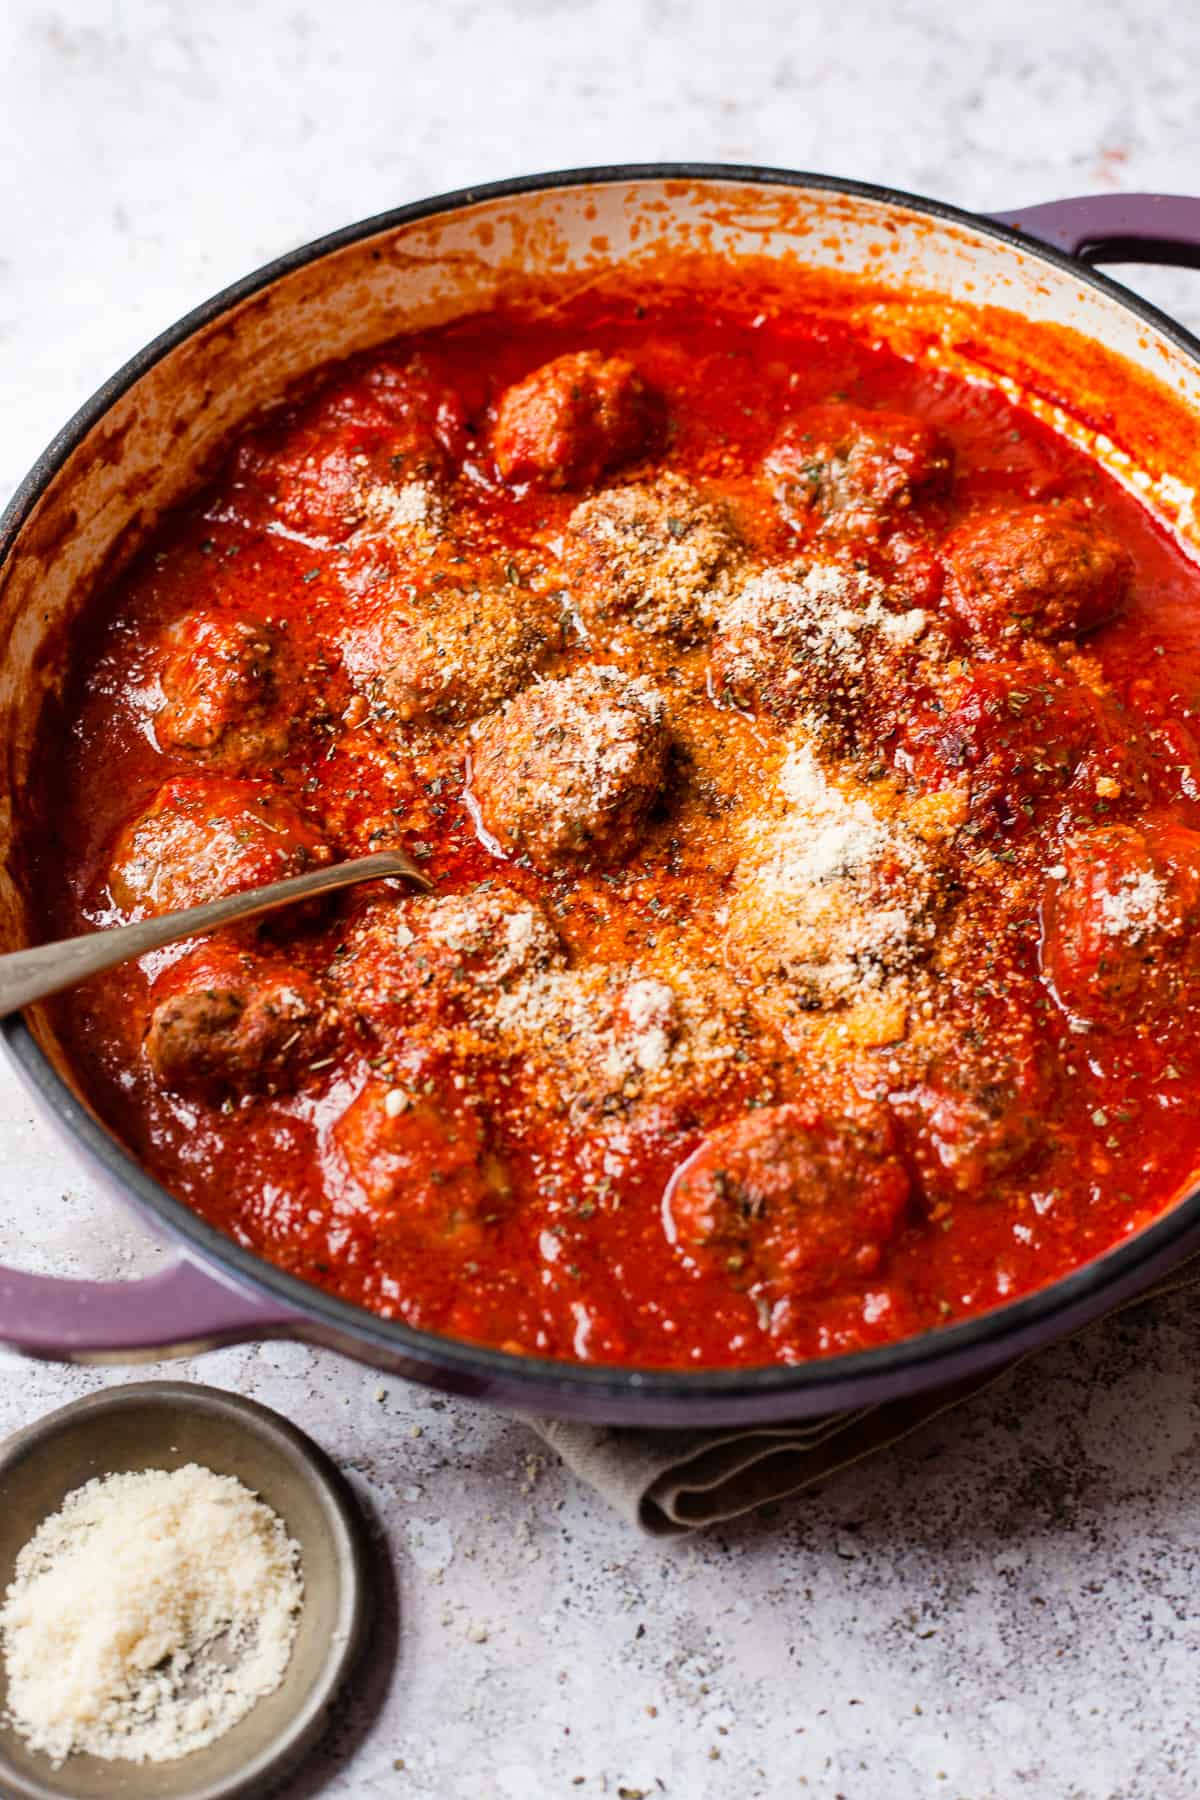 Meatballs in rich tomato sauce on a table